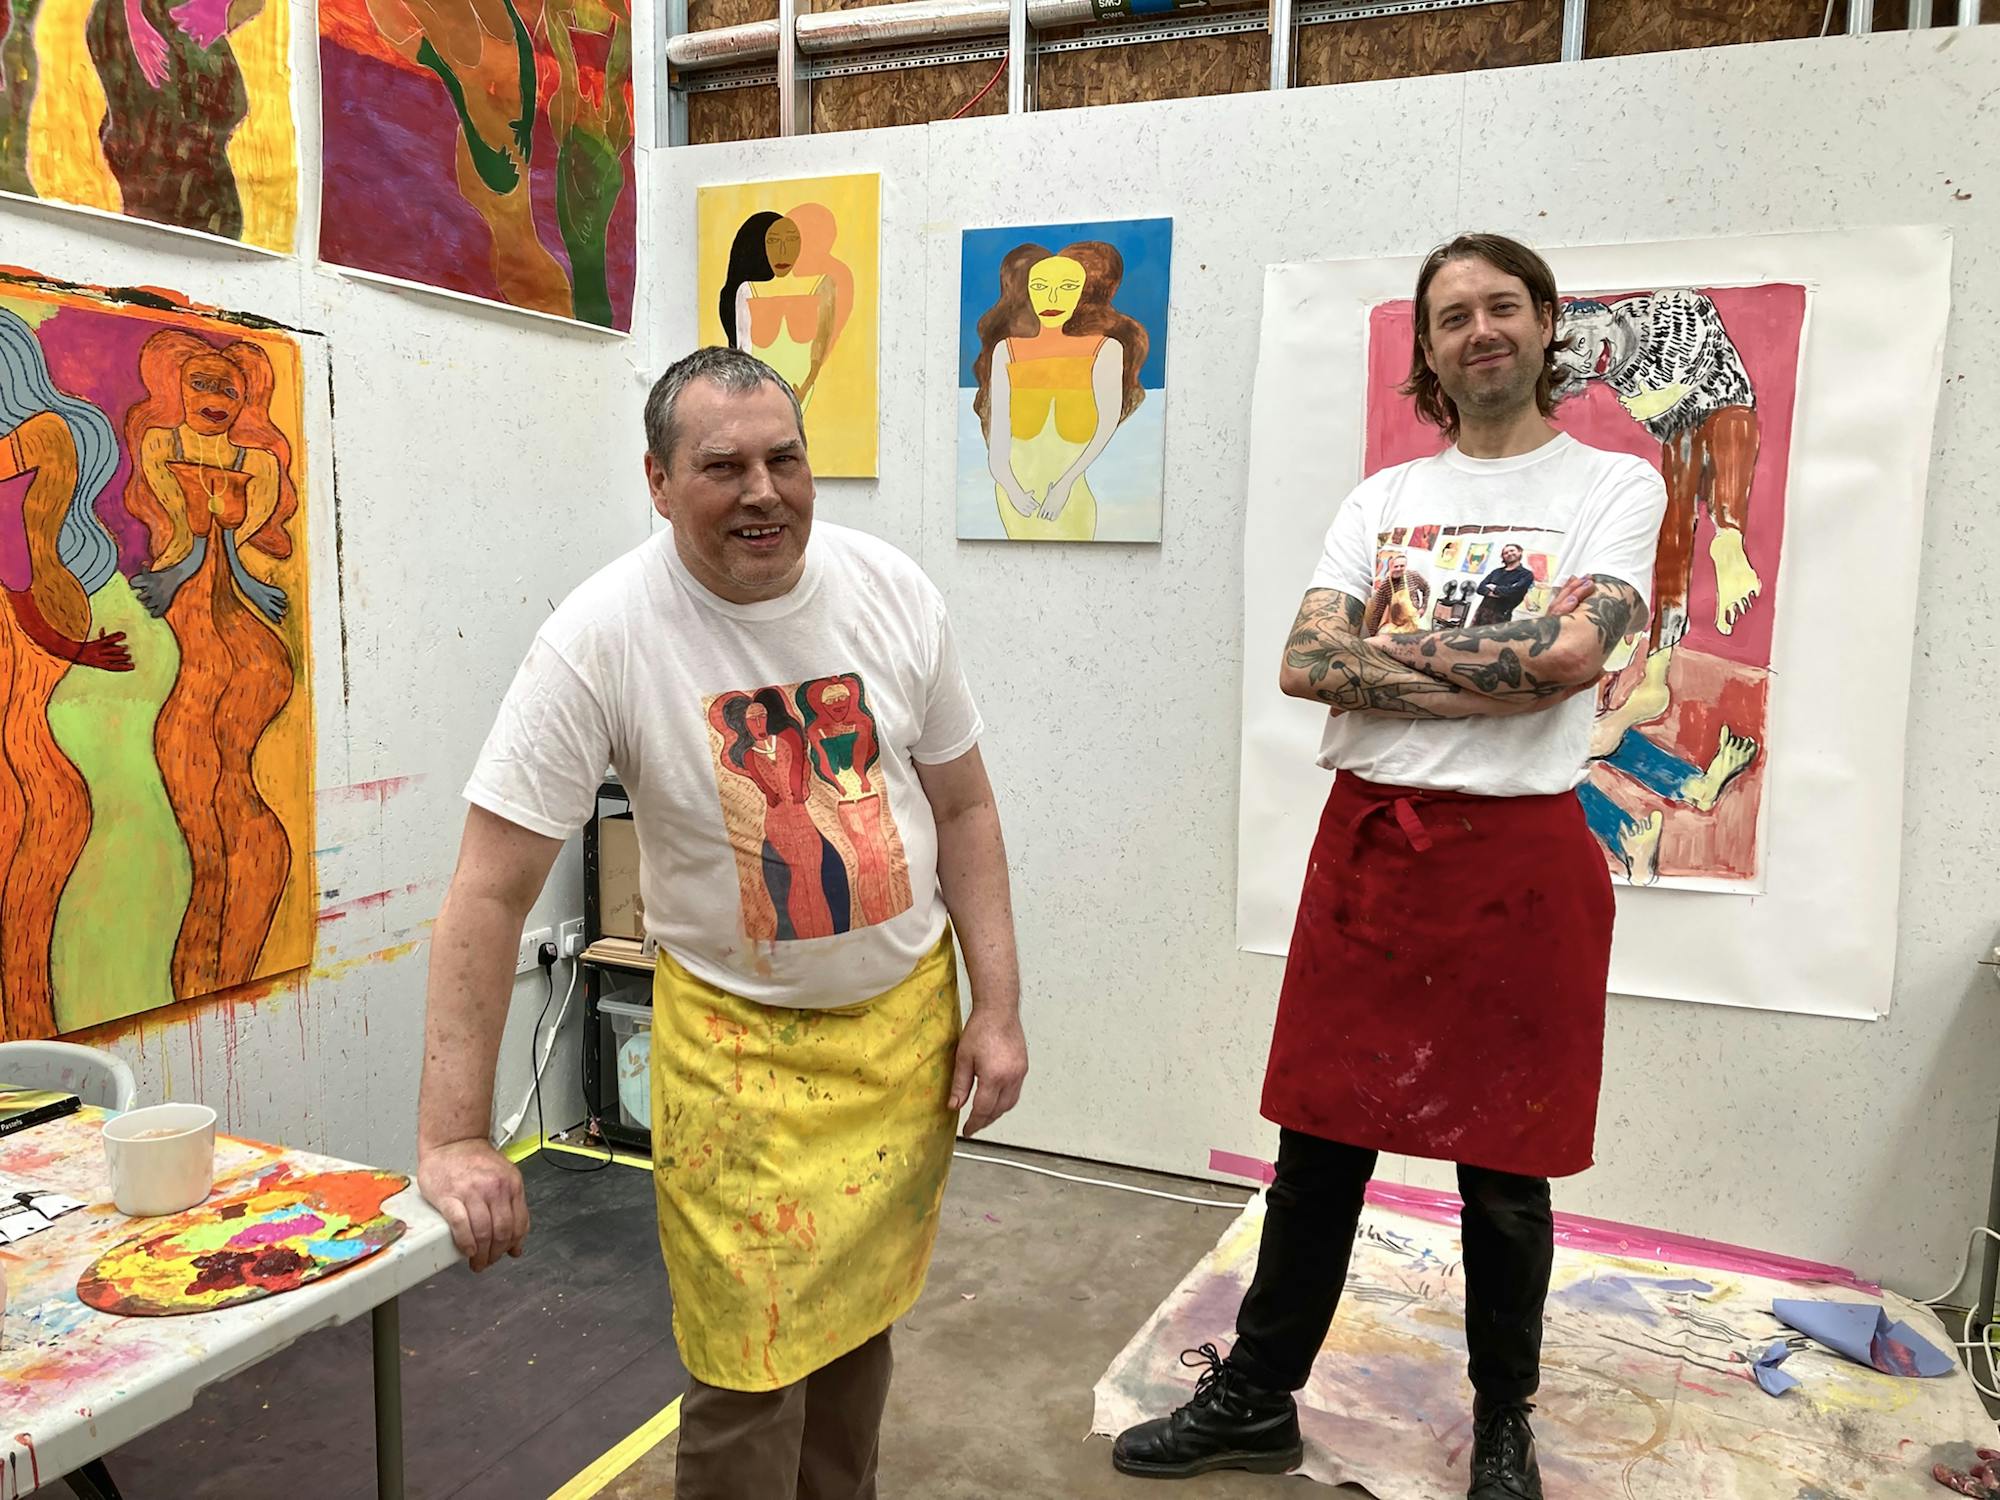 Robin Smith and Richard Phoenix. 'Parallel', Live painting event. ActionSpace studio Studio Voltaire. 2022. Image Courtesy of the Artists and ActionSpace